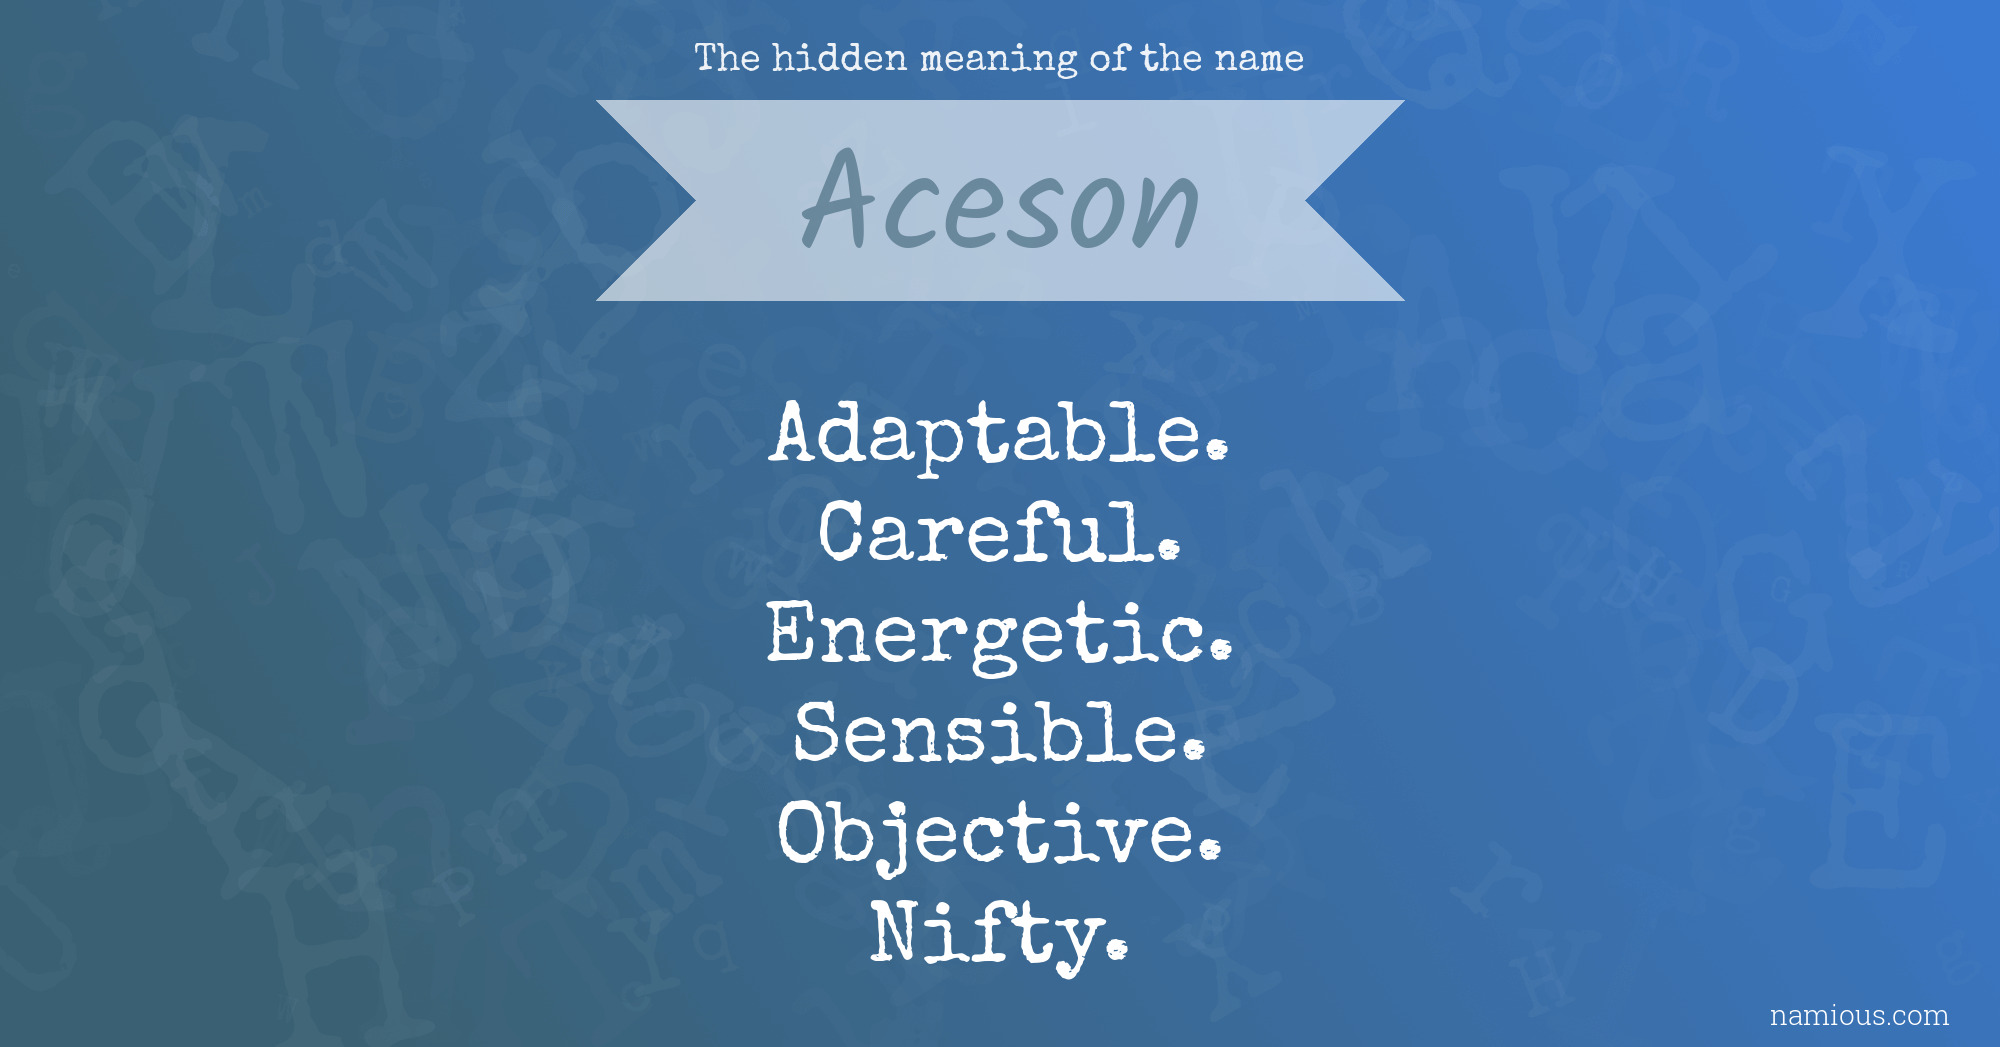 The hidden meaning of the name Aceson